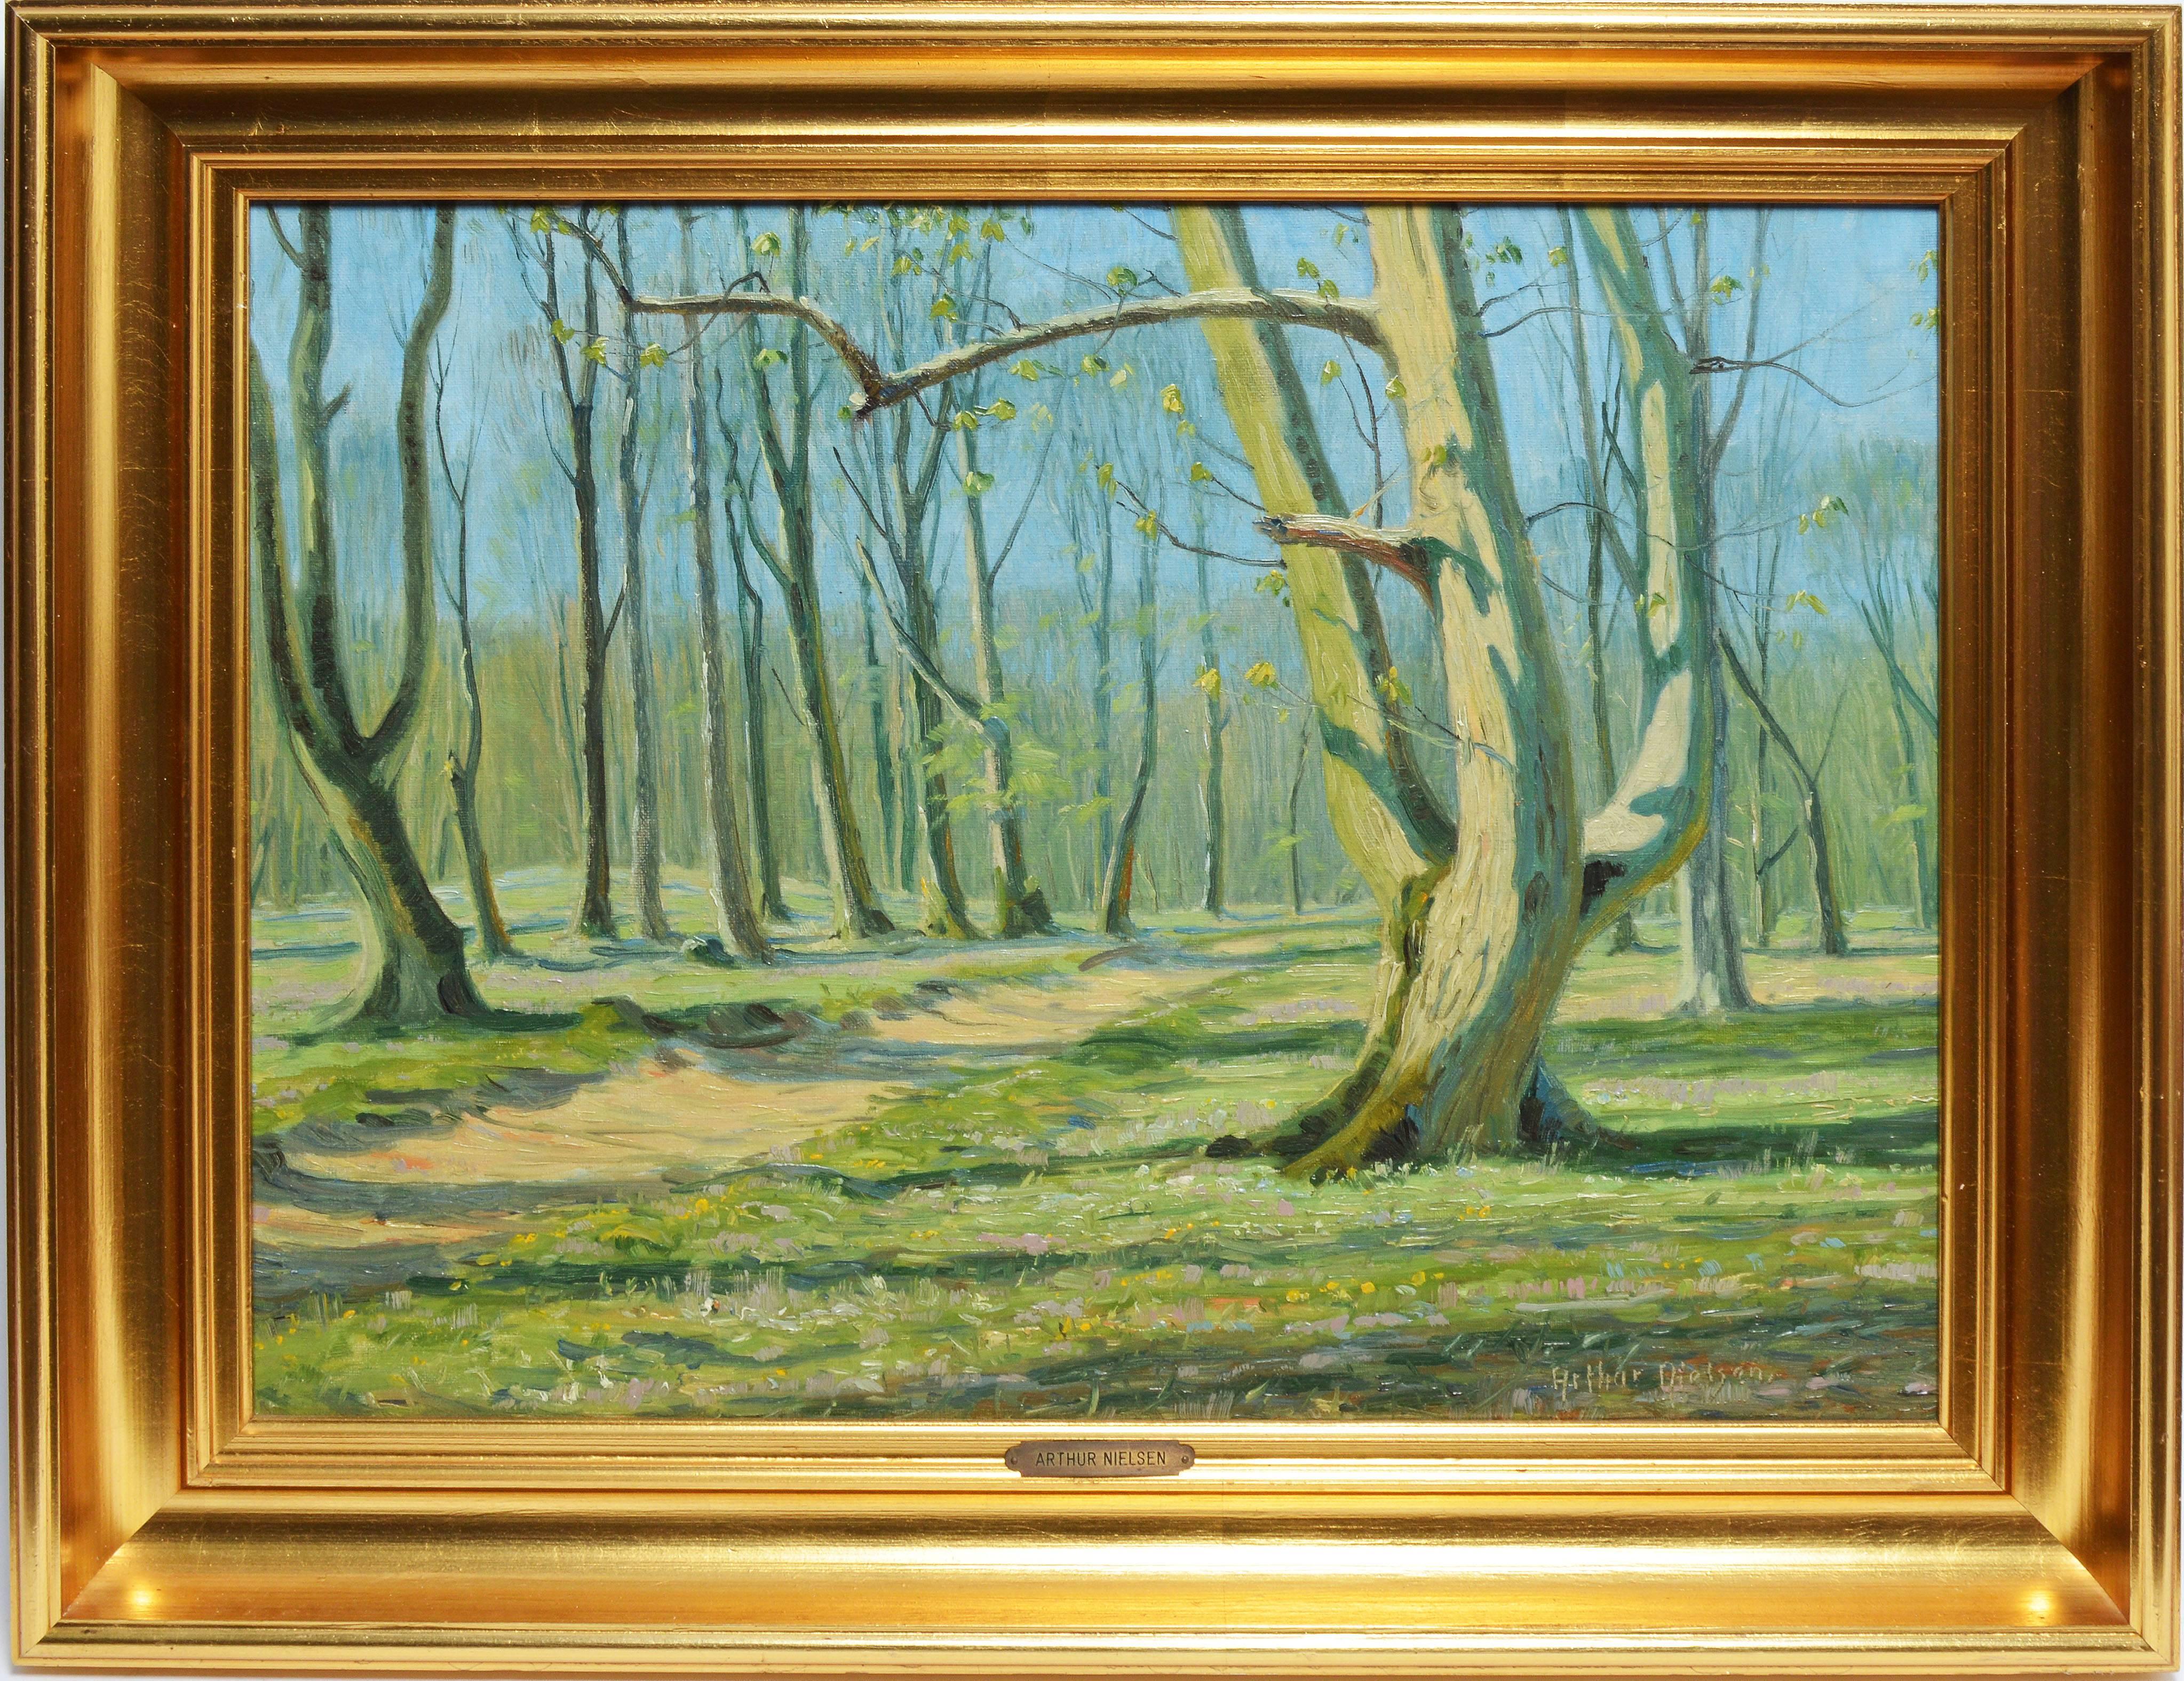 Impressionist sunlit landscape painting by Arthur Nielsen  (1883 - 1946).  Oil on canvas, circa 1910.  Signed lower right, "Arthur Nielsen".  Displayed in a giltwood frame.  Image size, 20"L x 15.5"H, overall 24"L x 20"H.